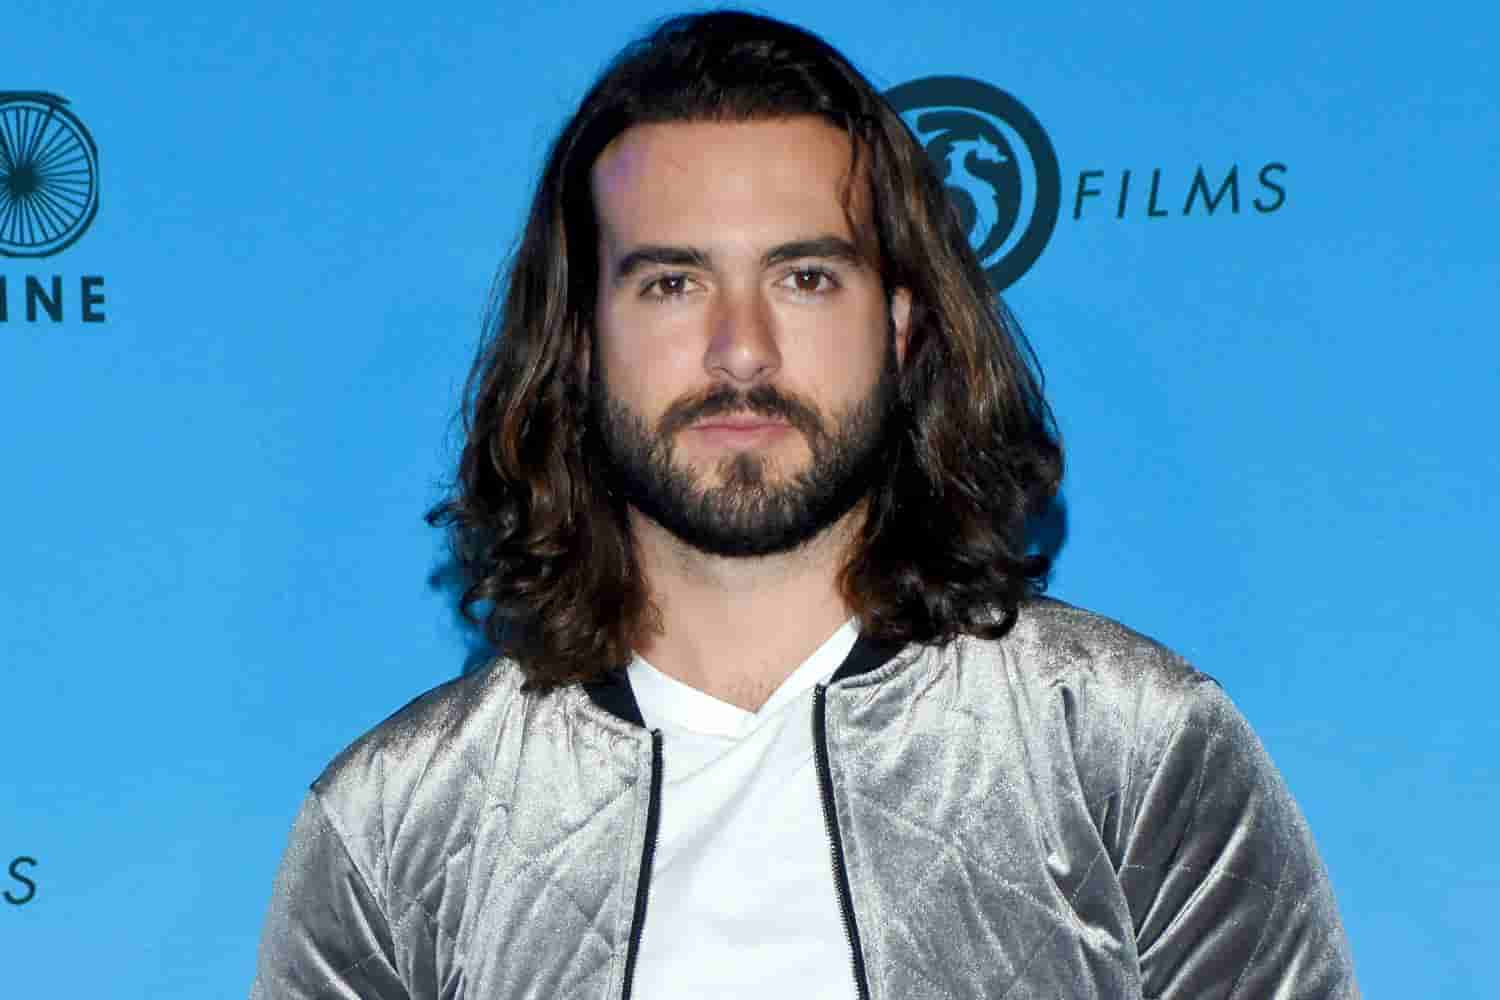 Mexican actor Pablo Lyle is sentenced to prison for a road rage incident.